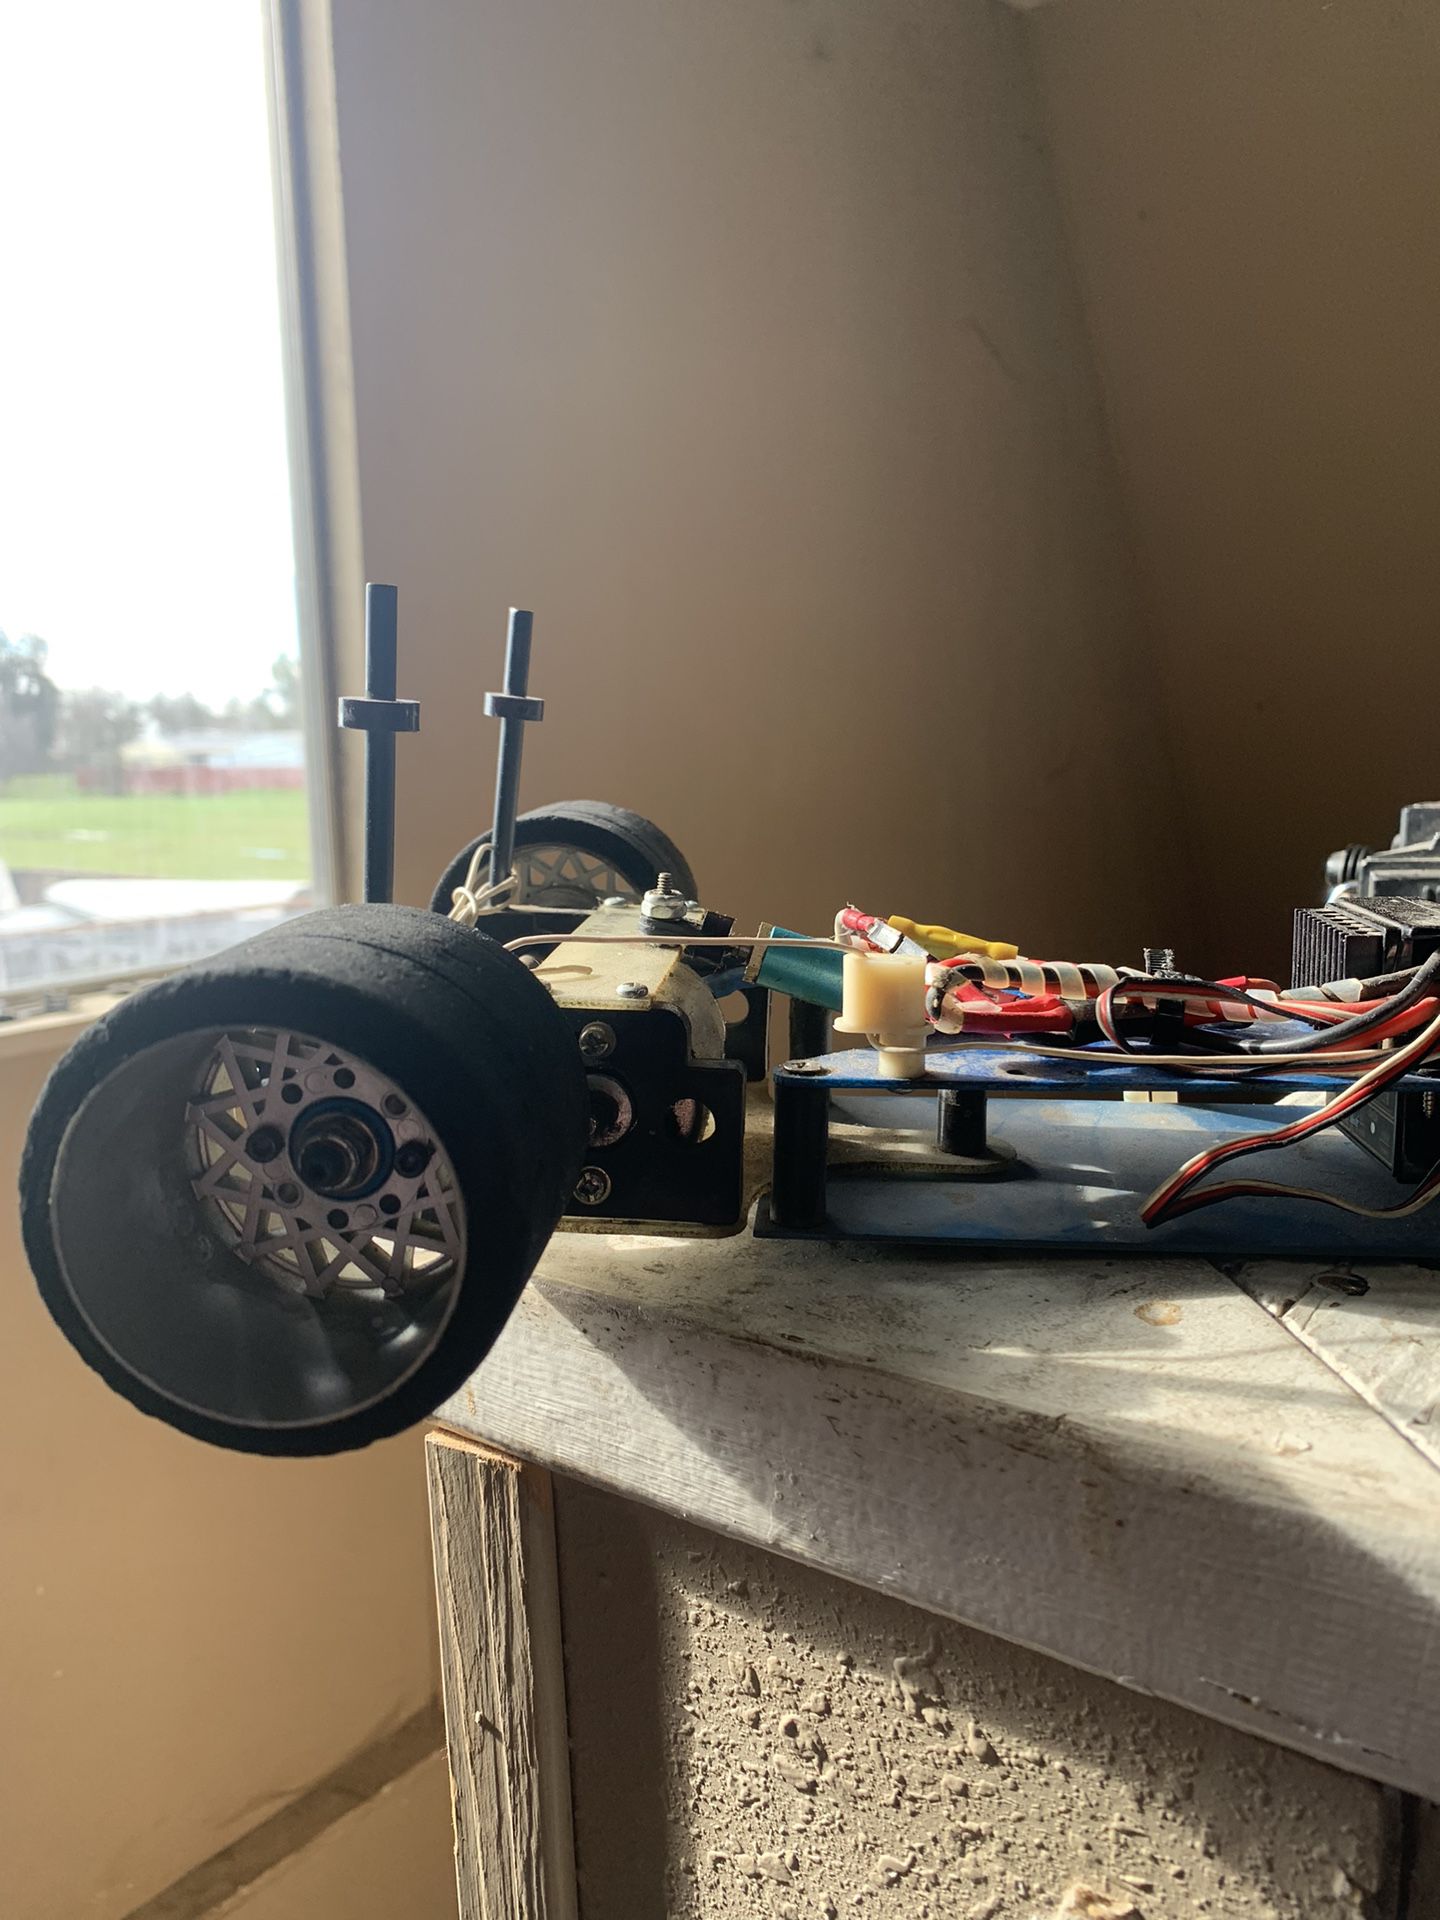 Fast And Furious Rc Drift Cars for Sale in Sacramento, CA - OfferUp